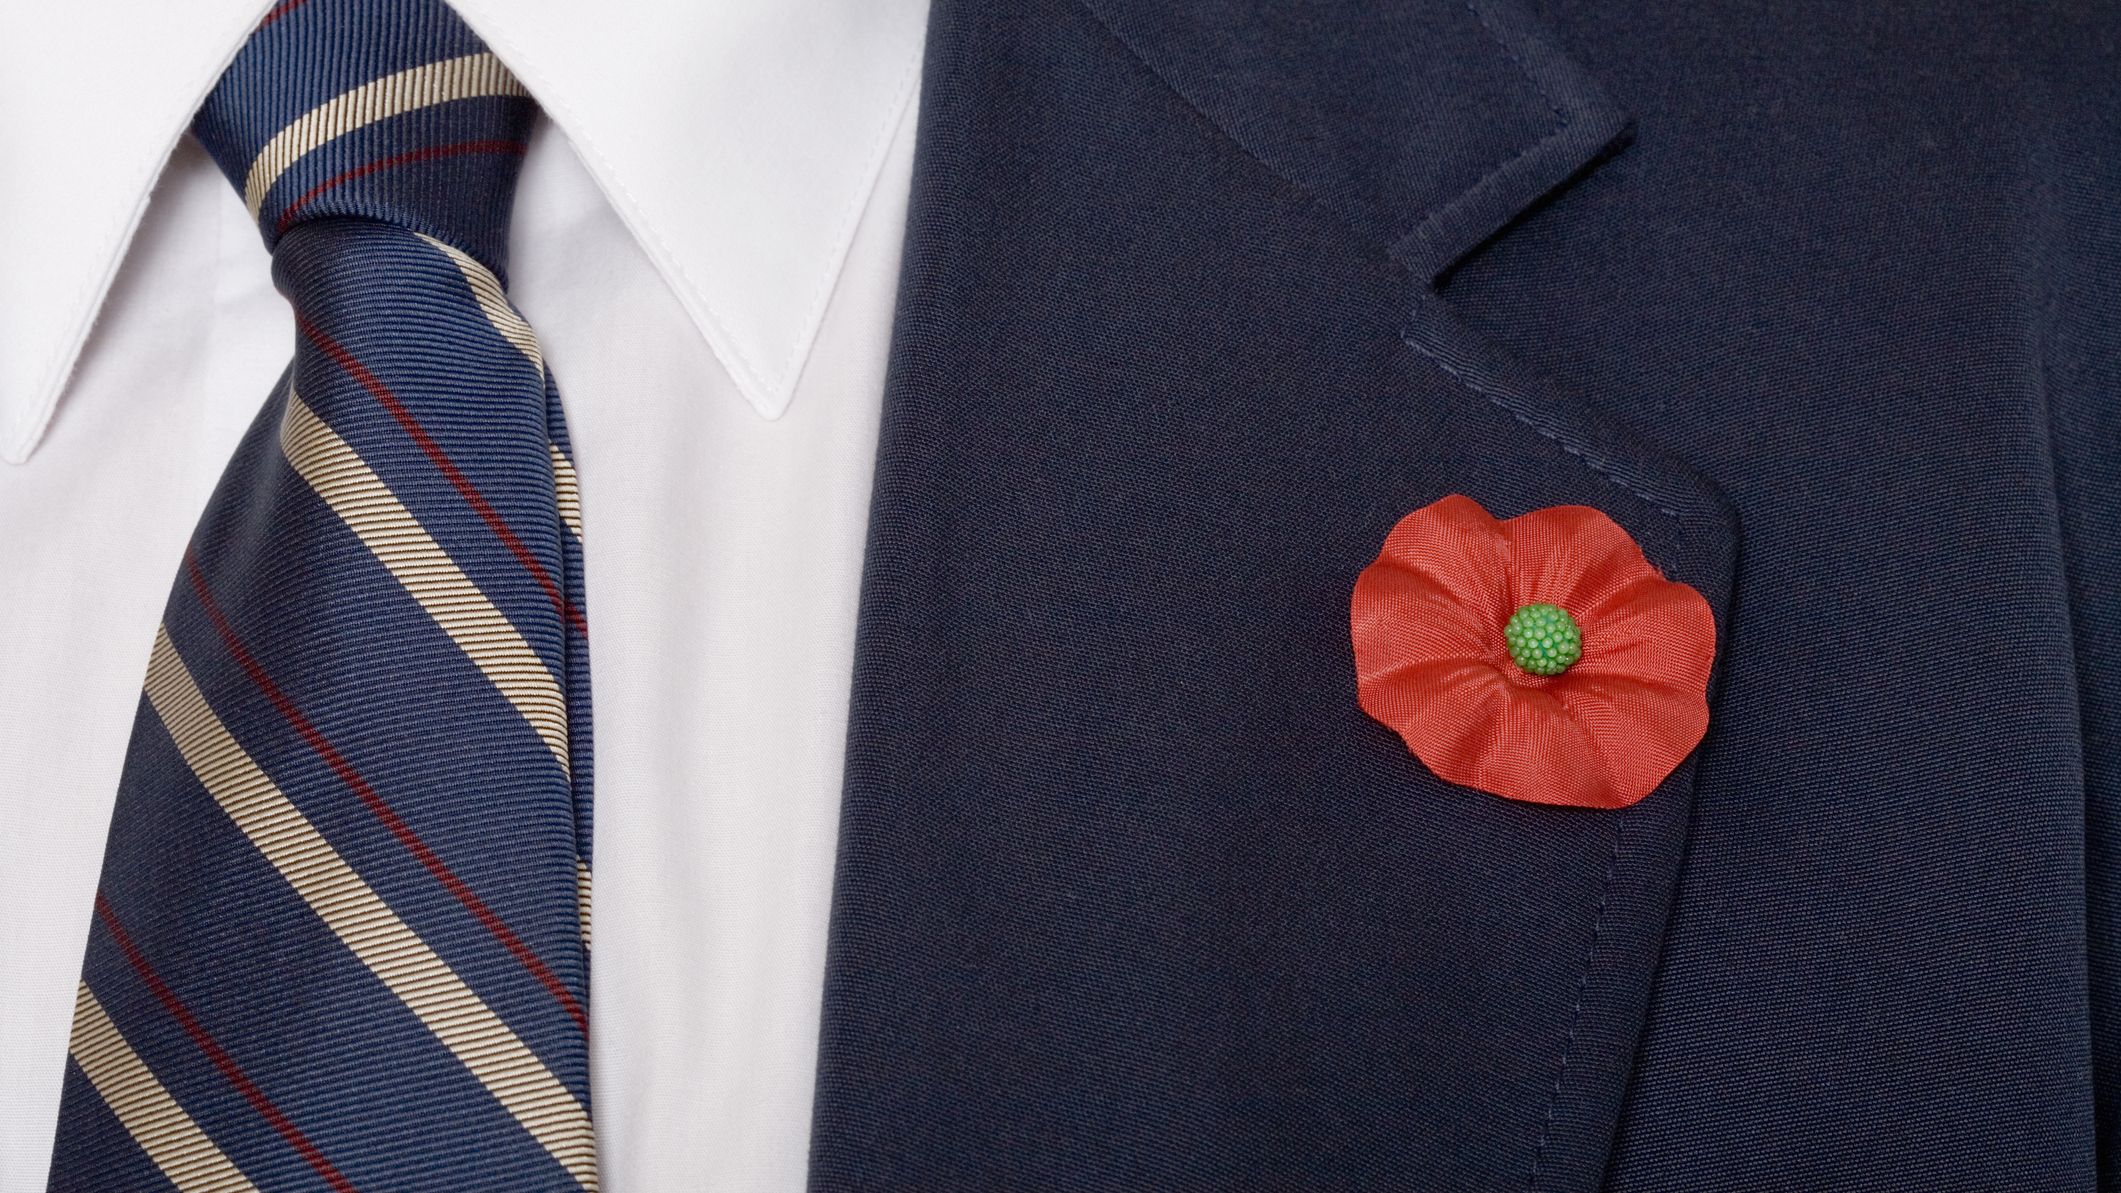 Why Do We Wear Poppies on Memorial Day?